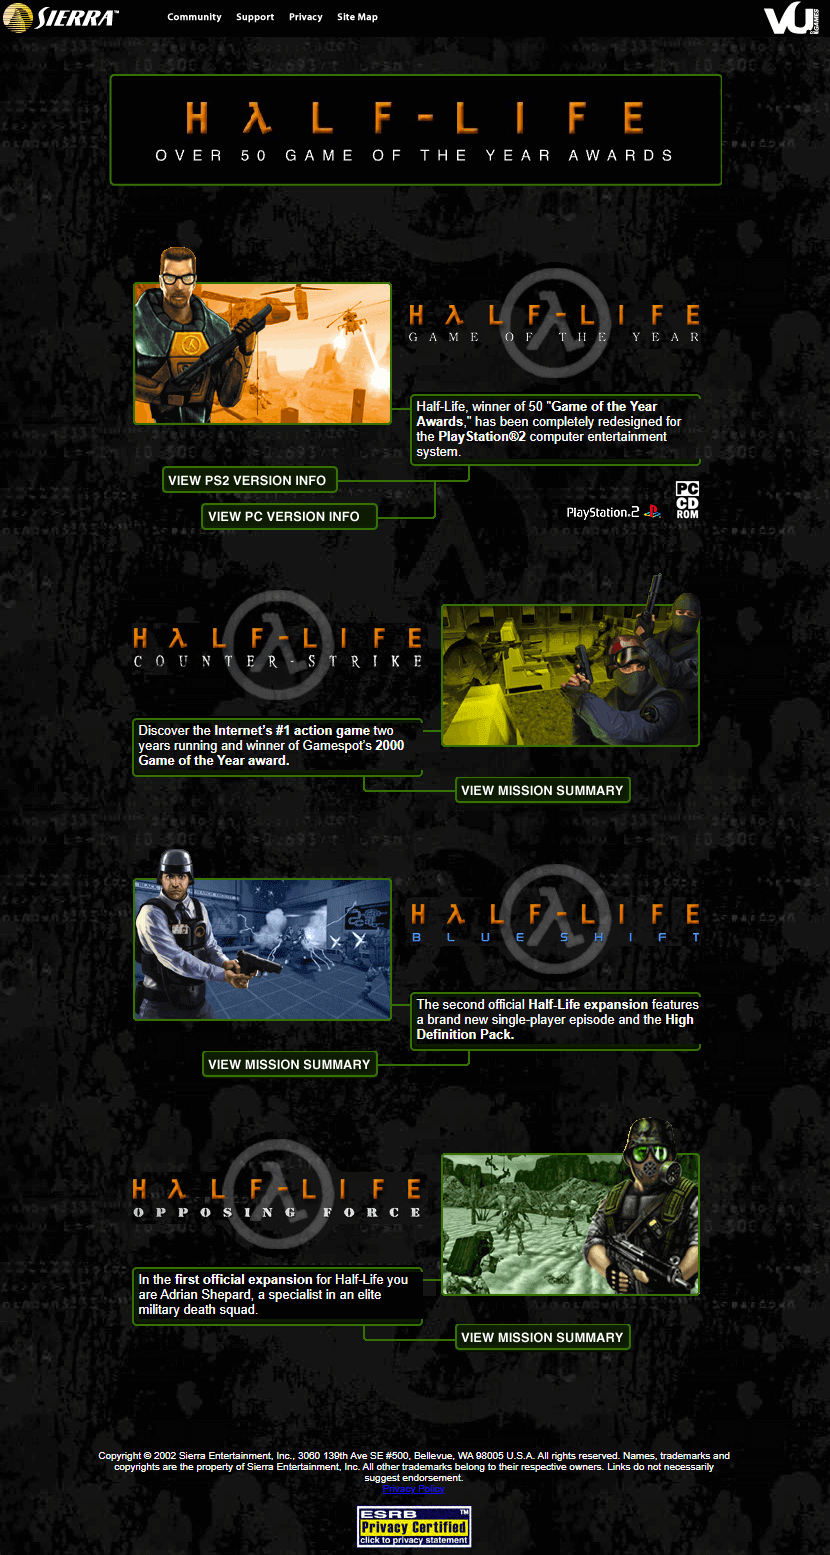 Half-Life: Game of the year website in 2002